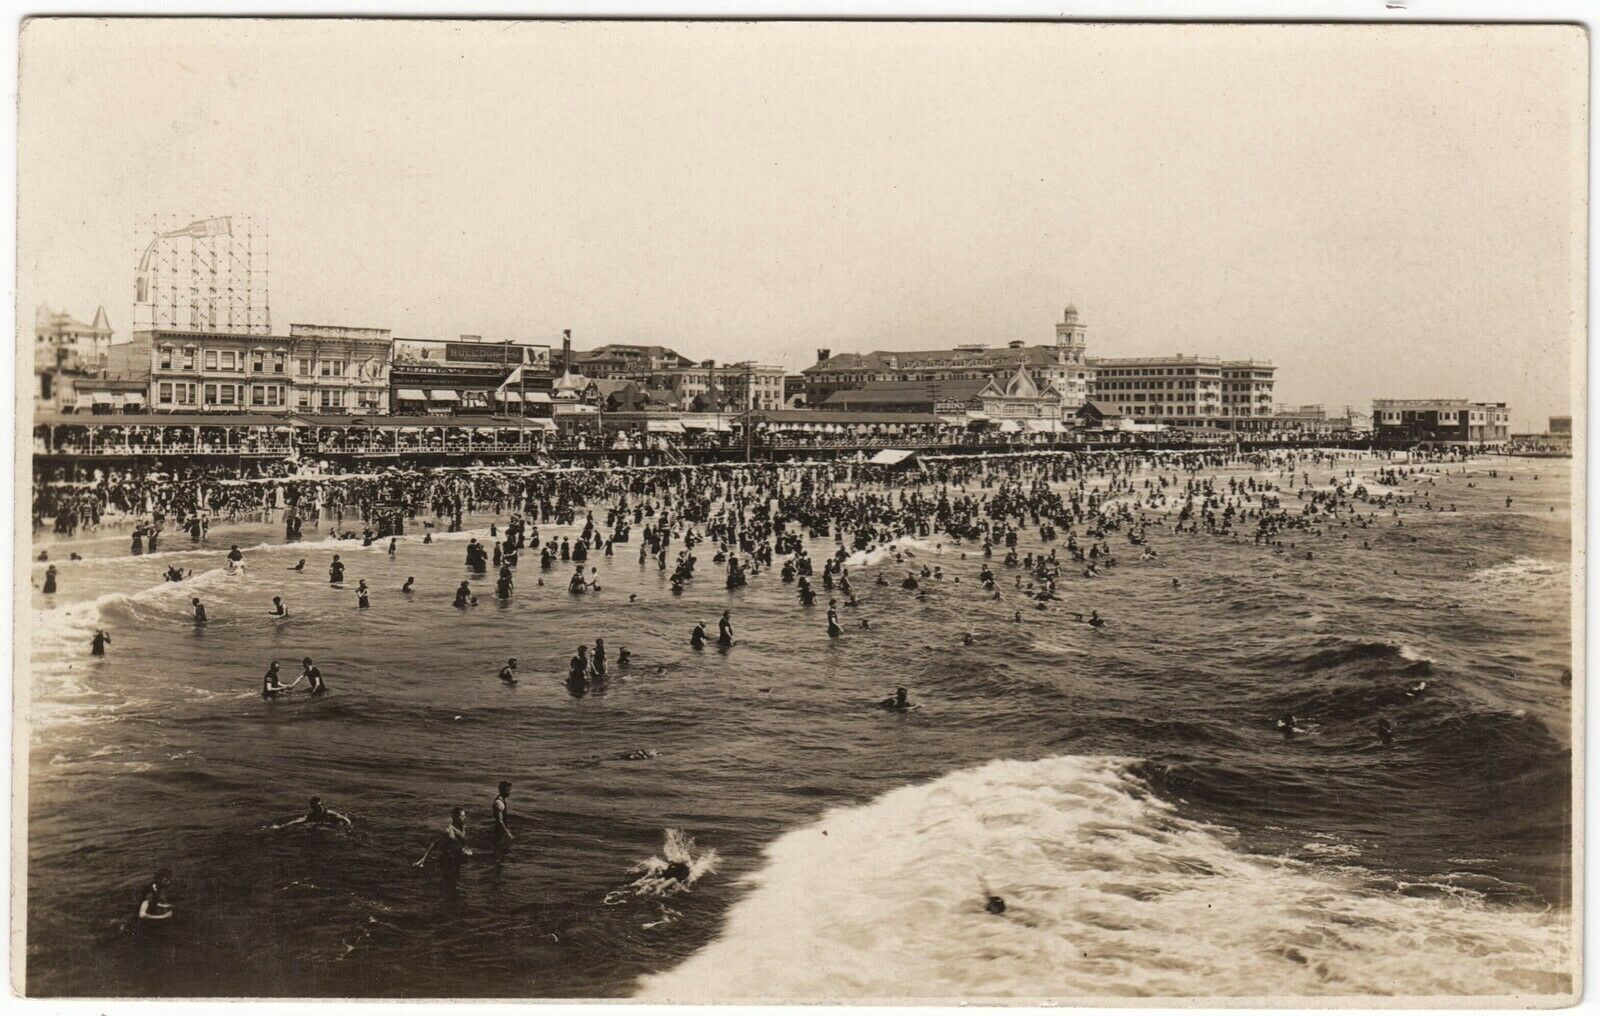 Atlantic City - Hotels Boardwalk Beach Bathers and the Atlantic Ocean are all covered in this wide agle shot - Almost looks like fun - c 1910